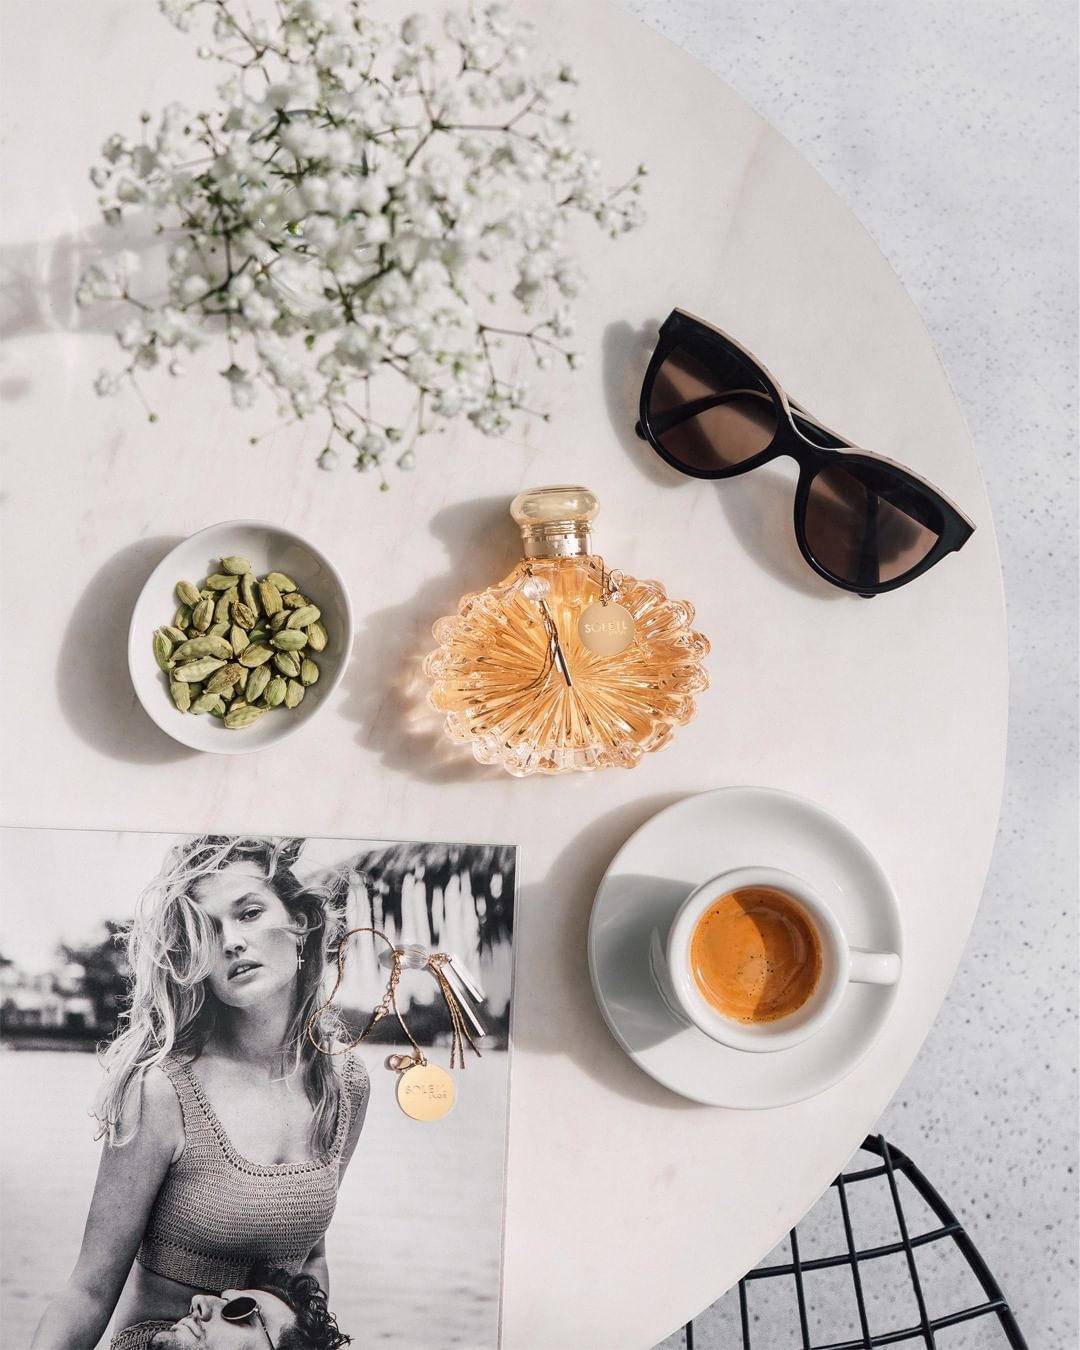 LALIQUE - As irresistibly sweet as the first sip of coffee in the morning. Soleil Lalique, available on lalique.com
.
.
.
.
.
#soleillalique #IAMTHESUNCHILD #hairmist #soleil #sunchild #laliqueparfums...